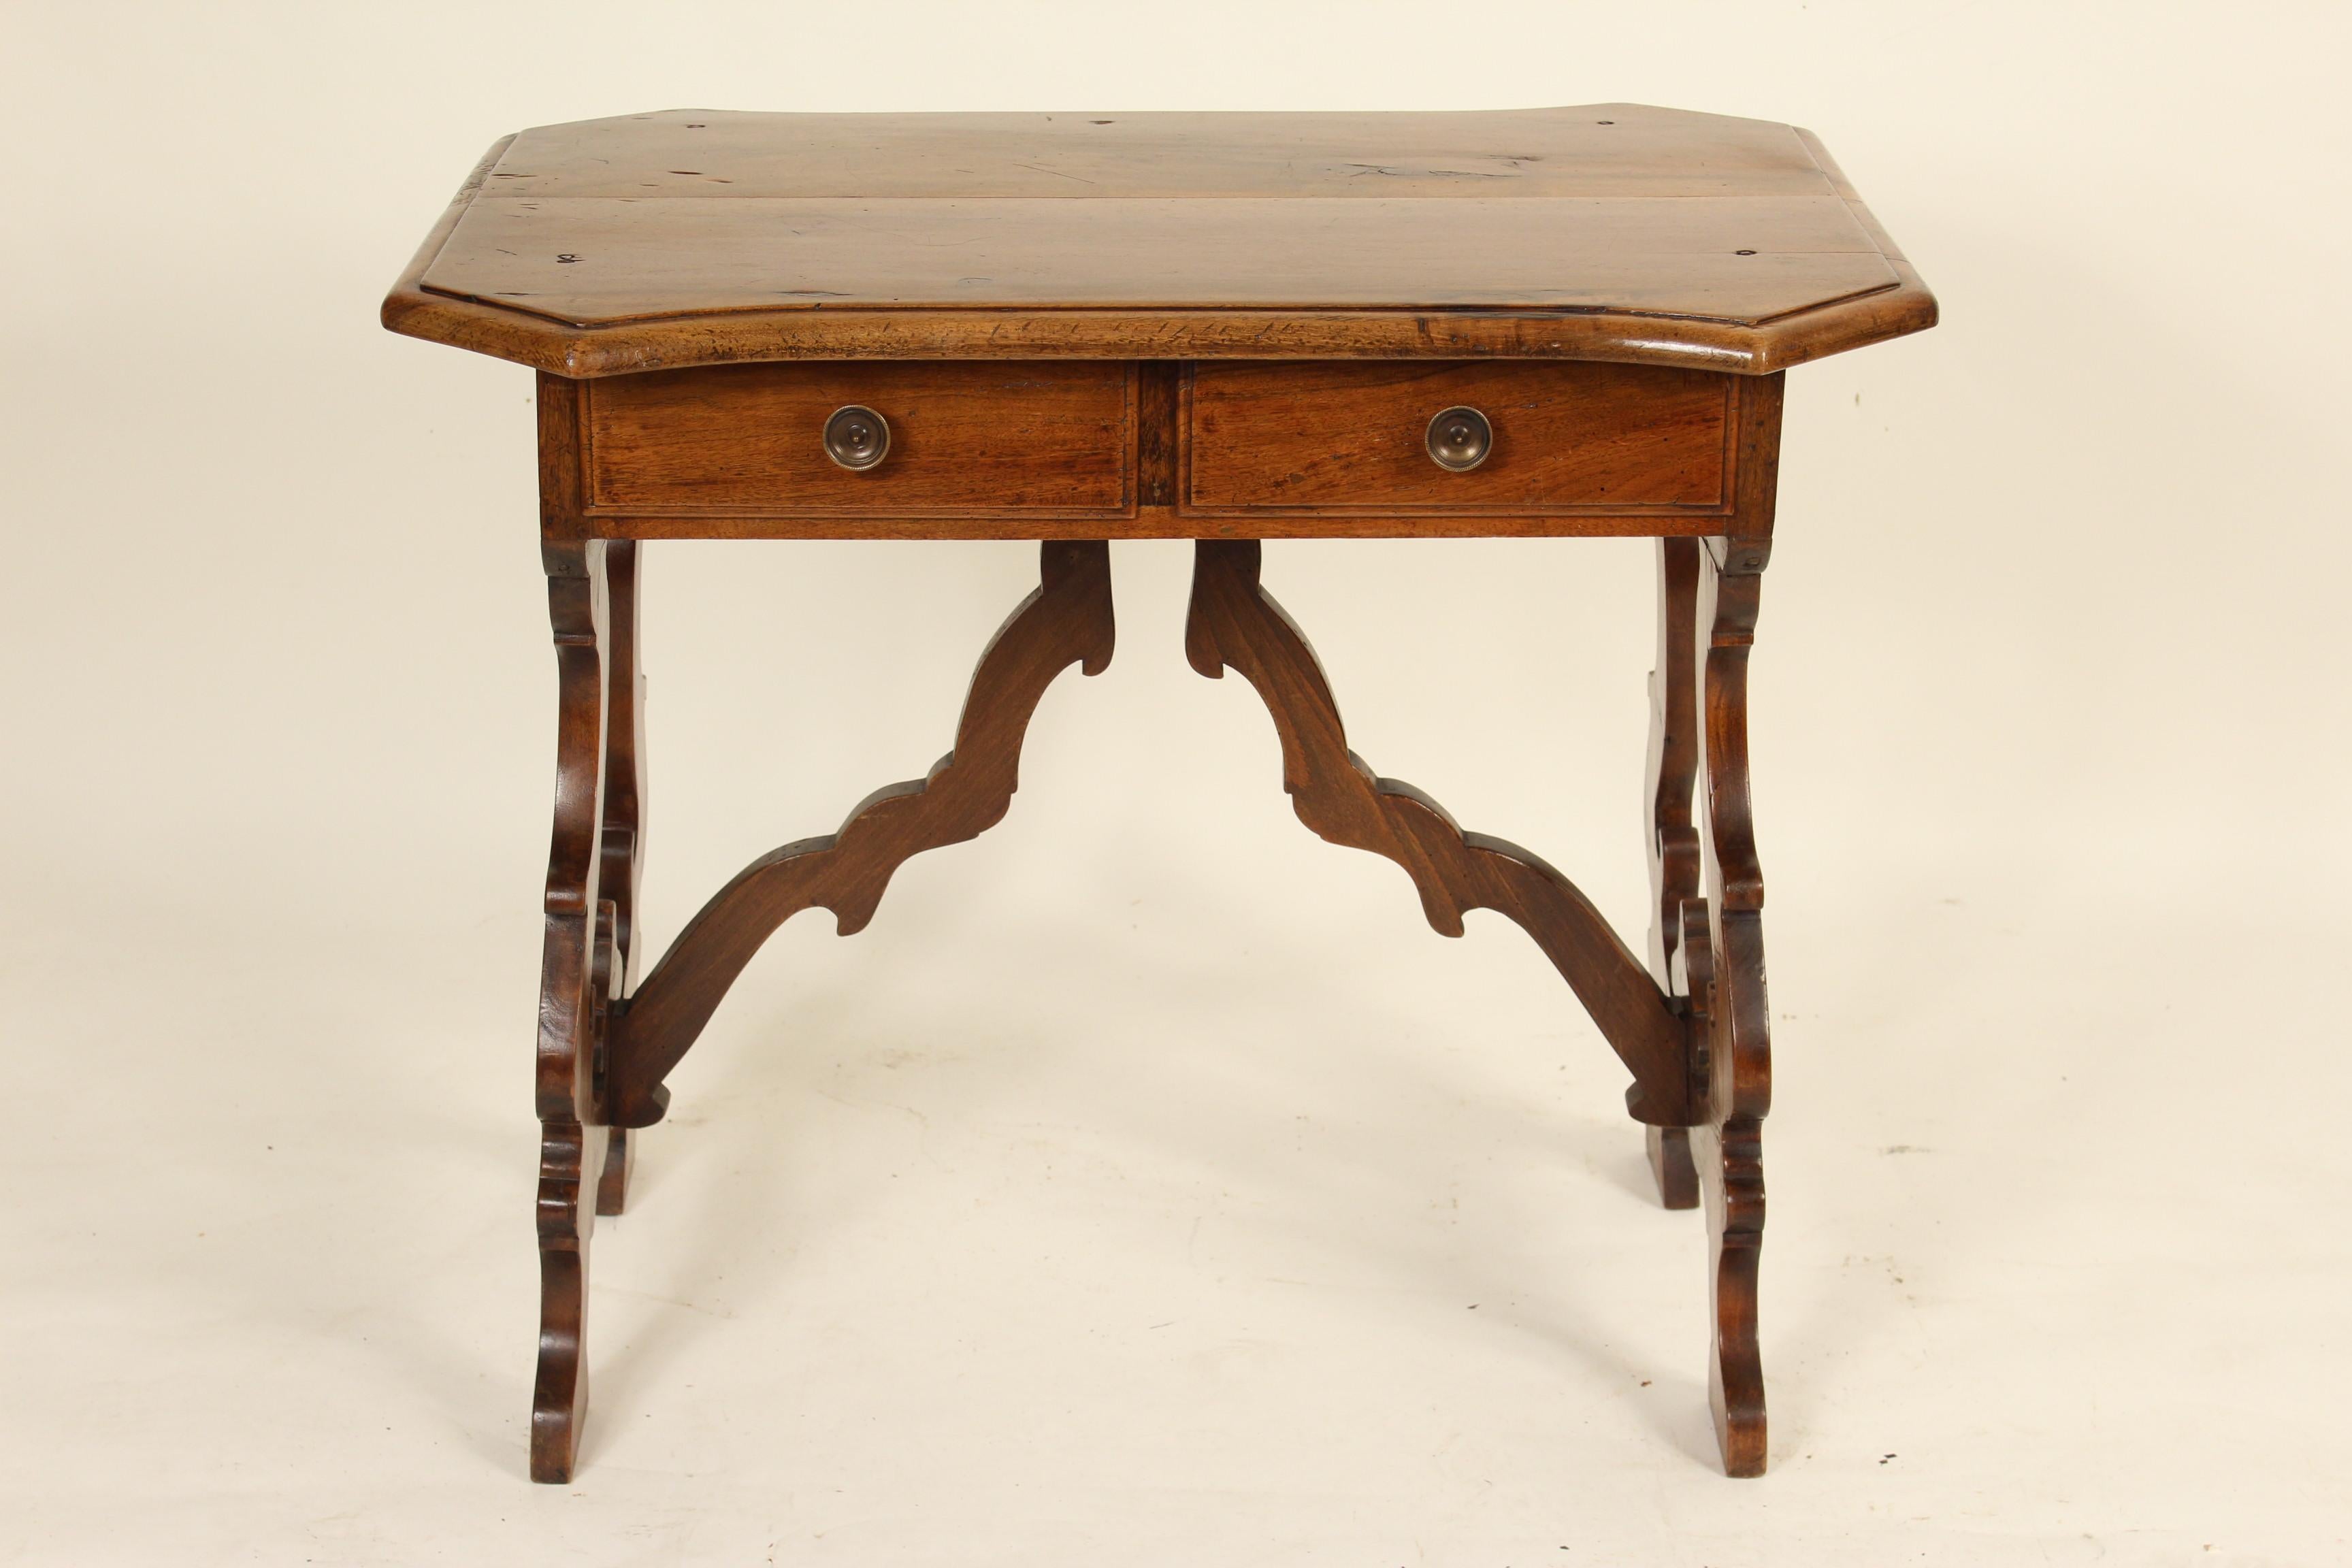 Italian baroque style walnut writing table, made from antique and later elements, circa 1970s. The walnut on this table has excellent color, especially the top.